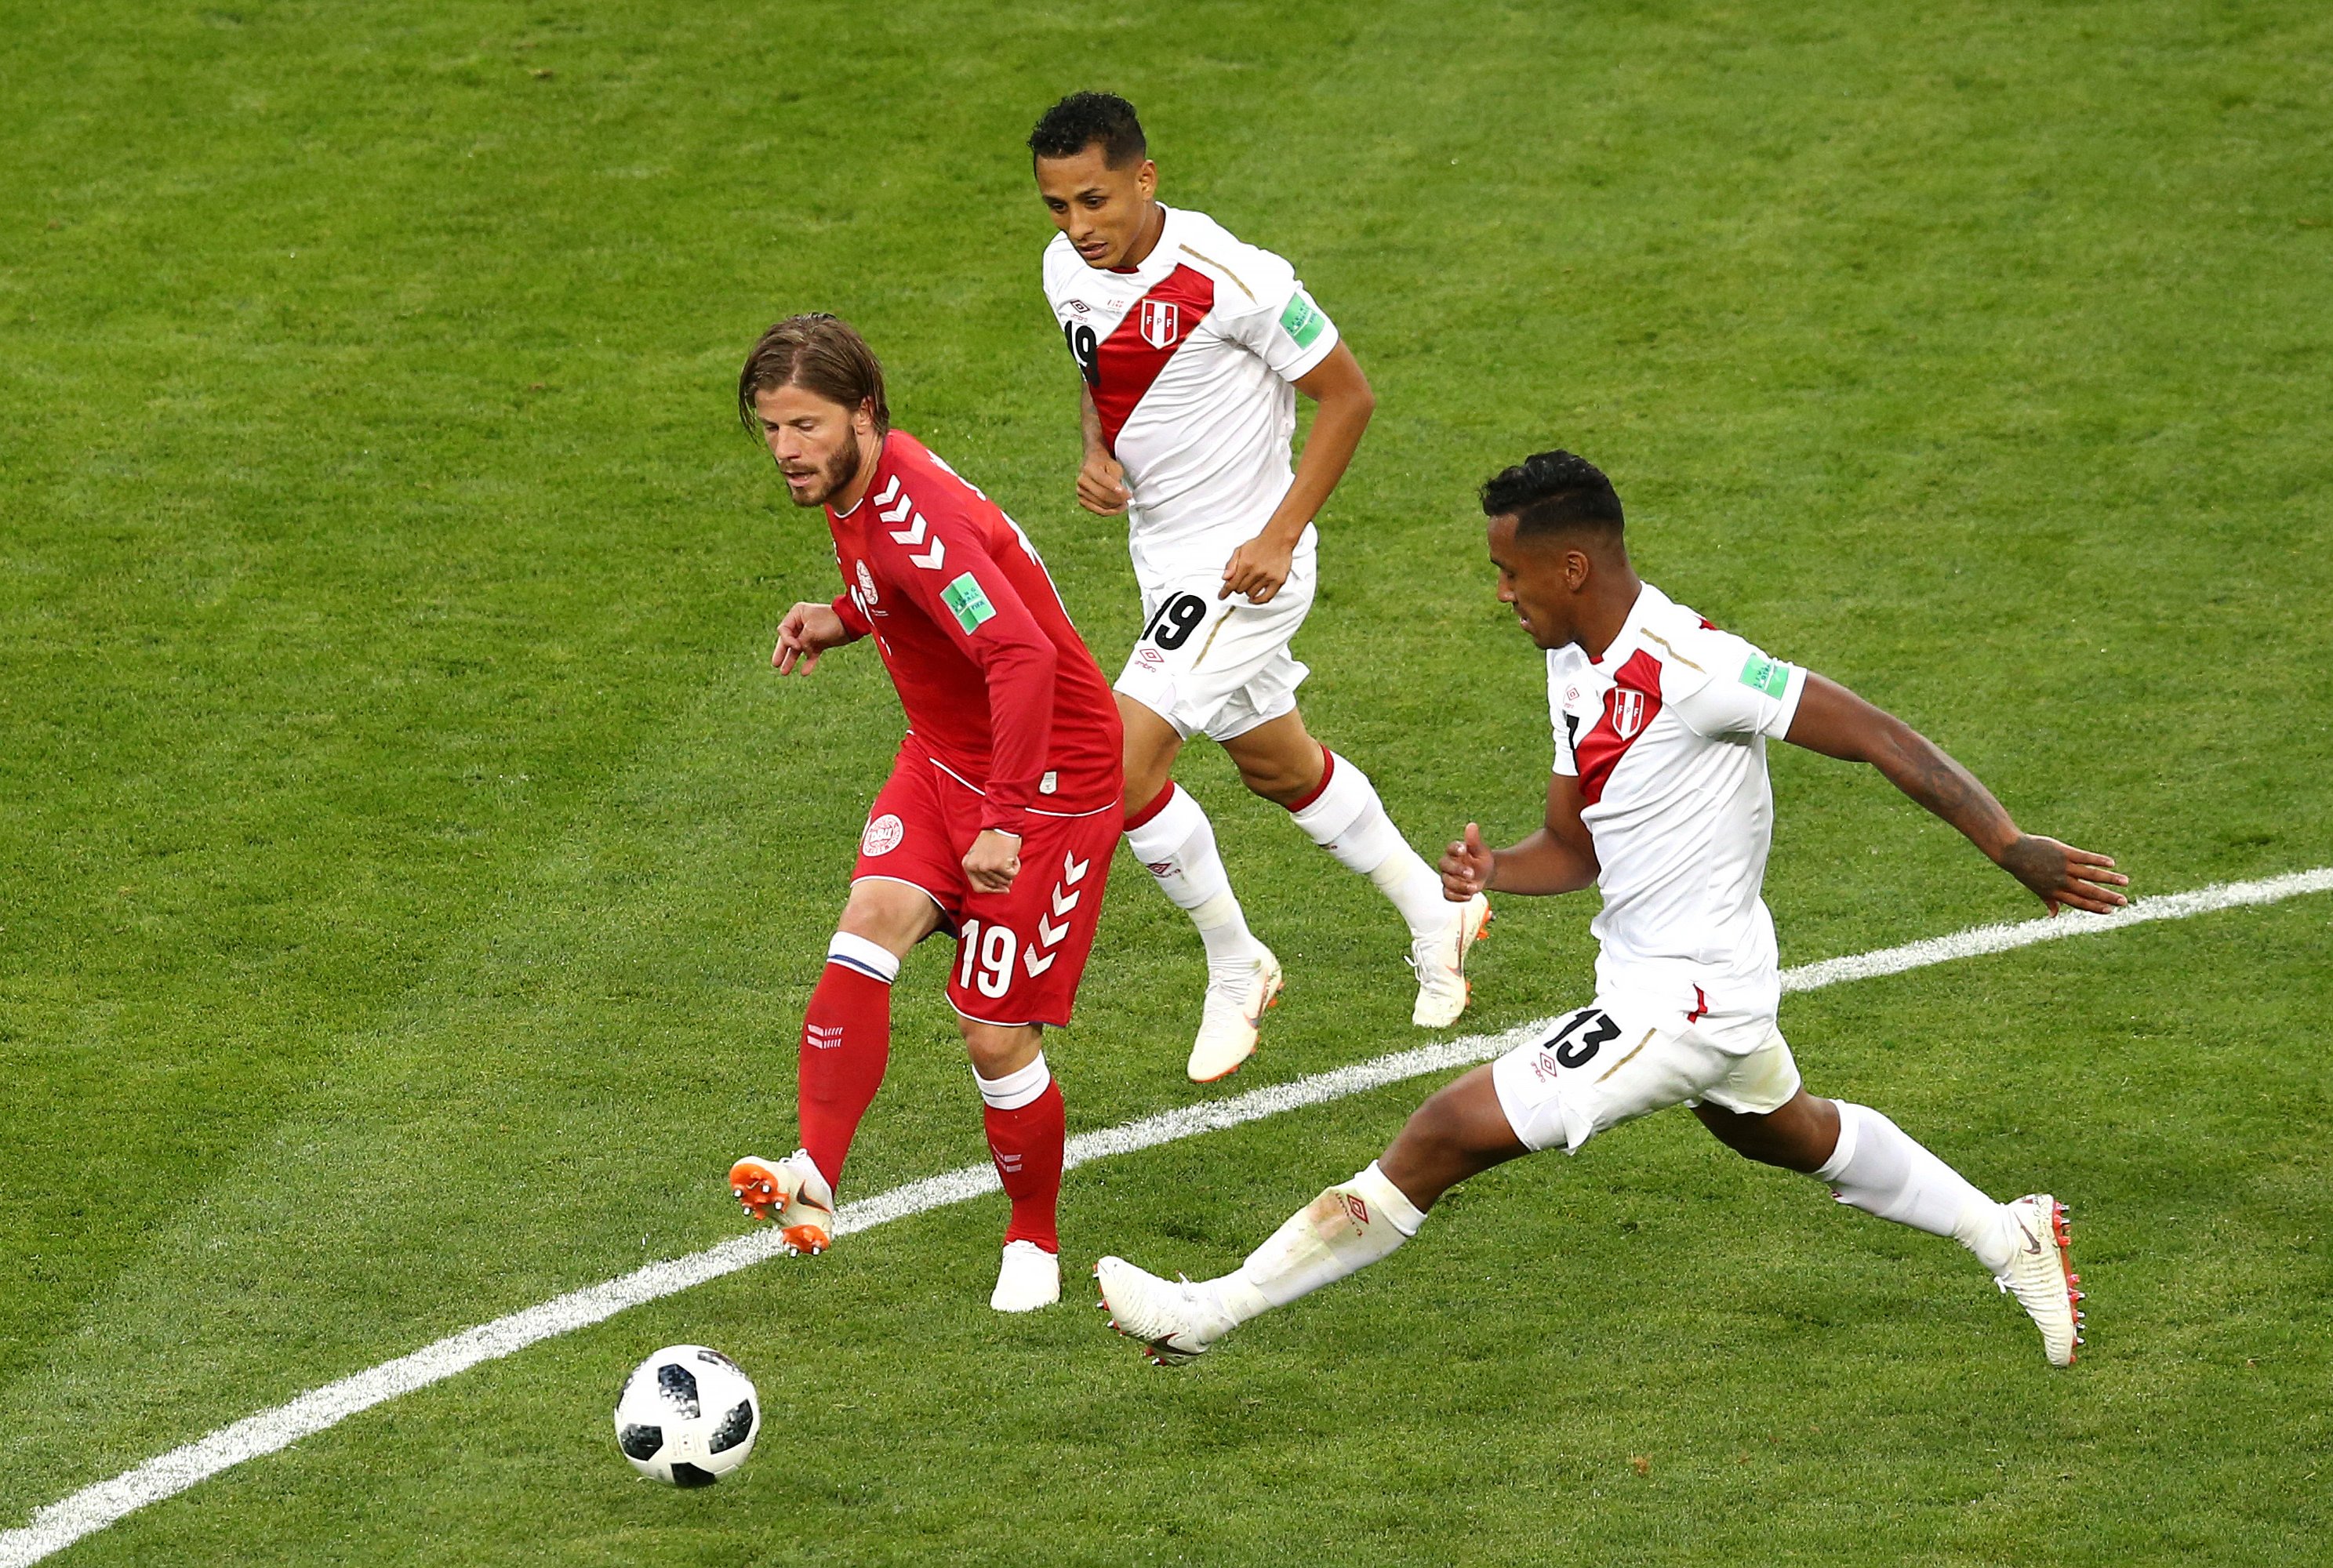 Denmark S William Kvist Stretchered Off With Injury Vs Peru At 18 World Cup News Scores Highlights Stats And Rumors Bleacher Report